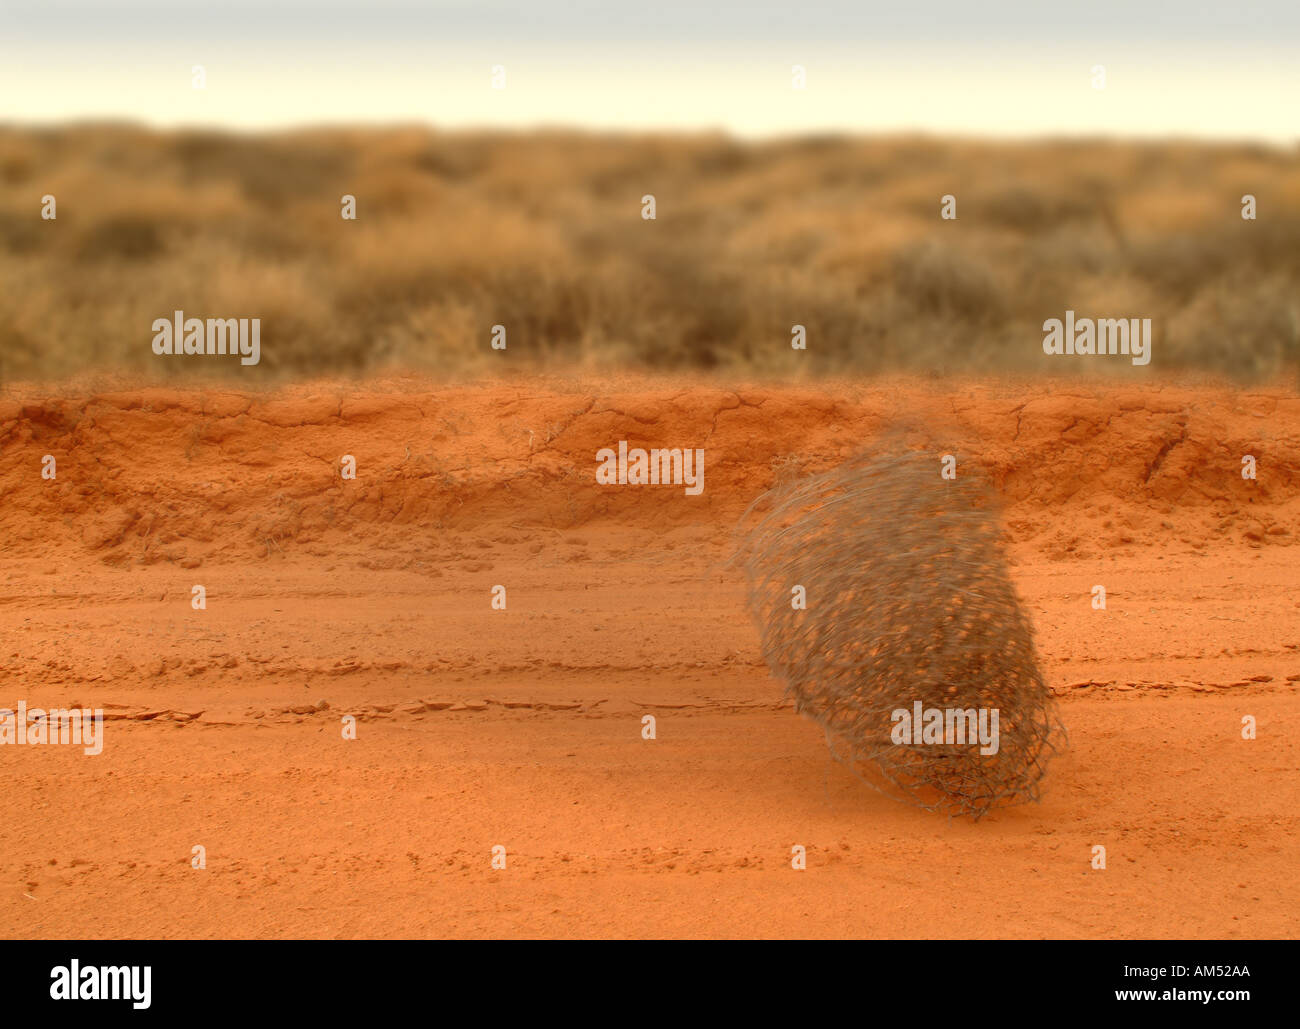 A tumbleweed rolling down a dirt road in the desert Stock Photo